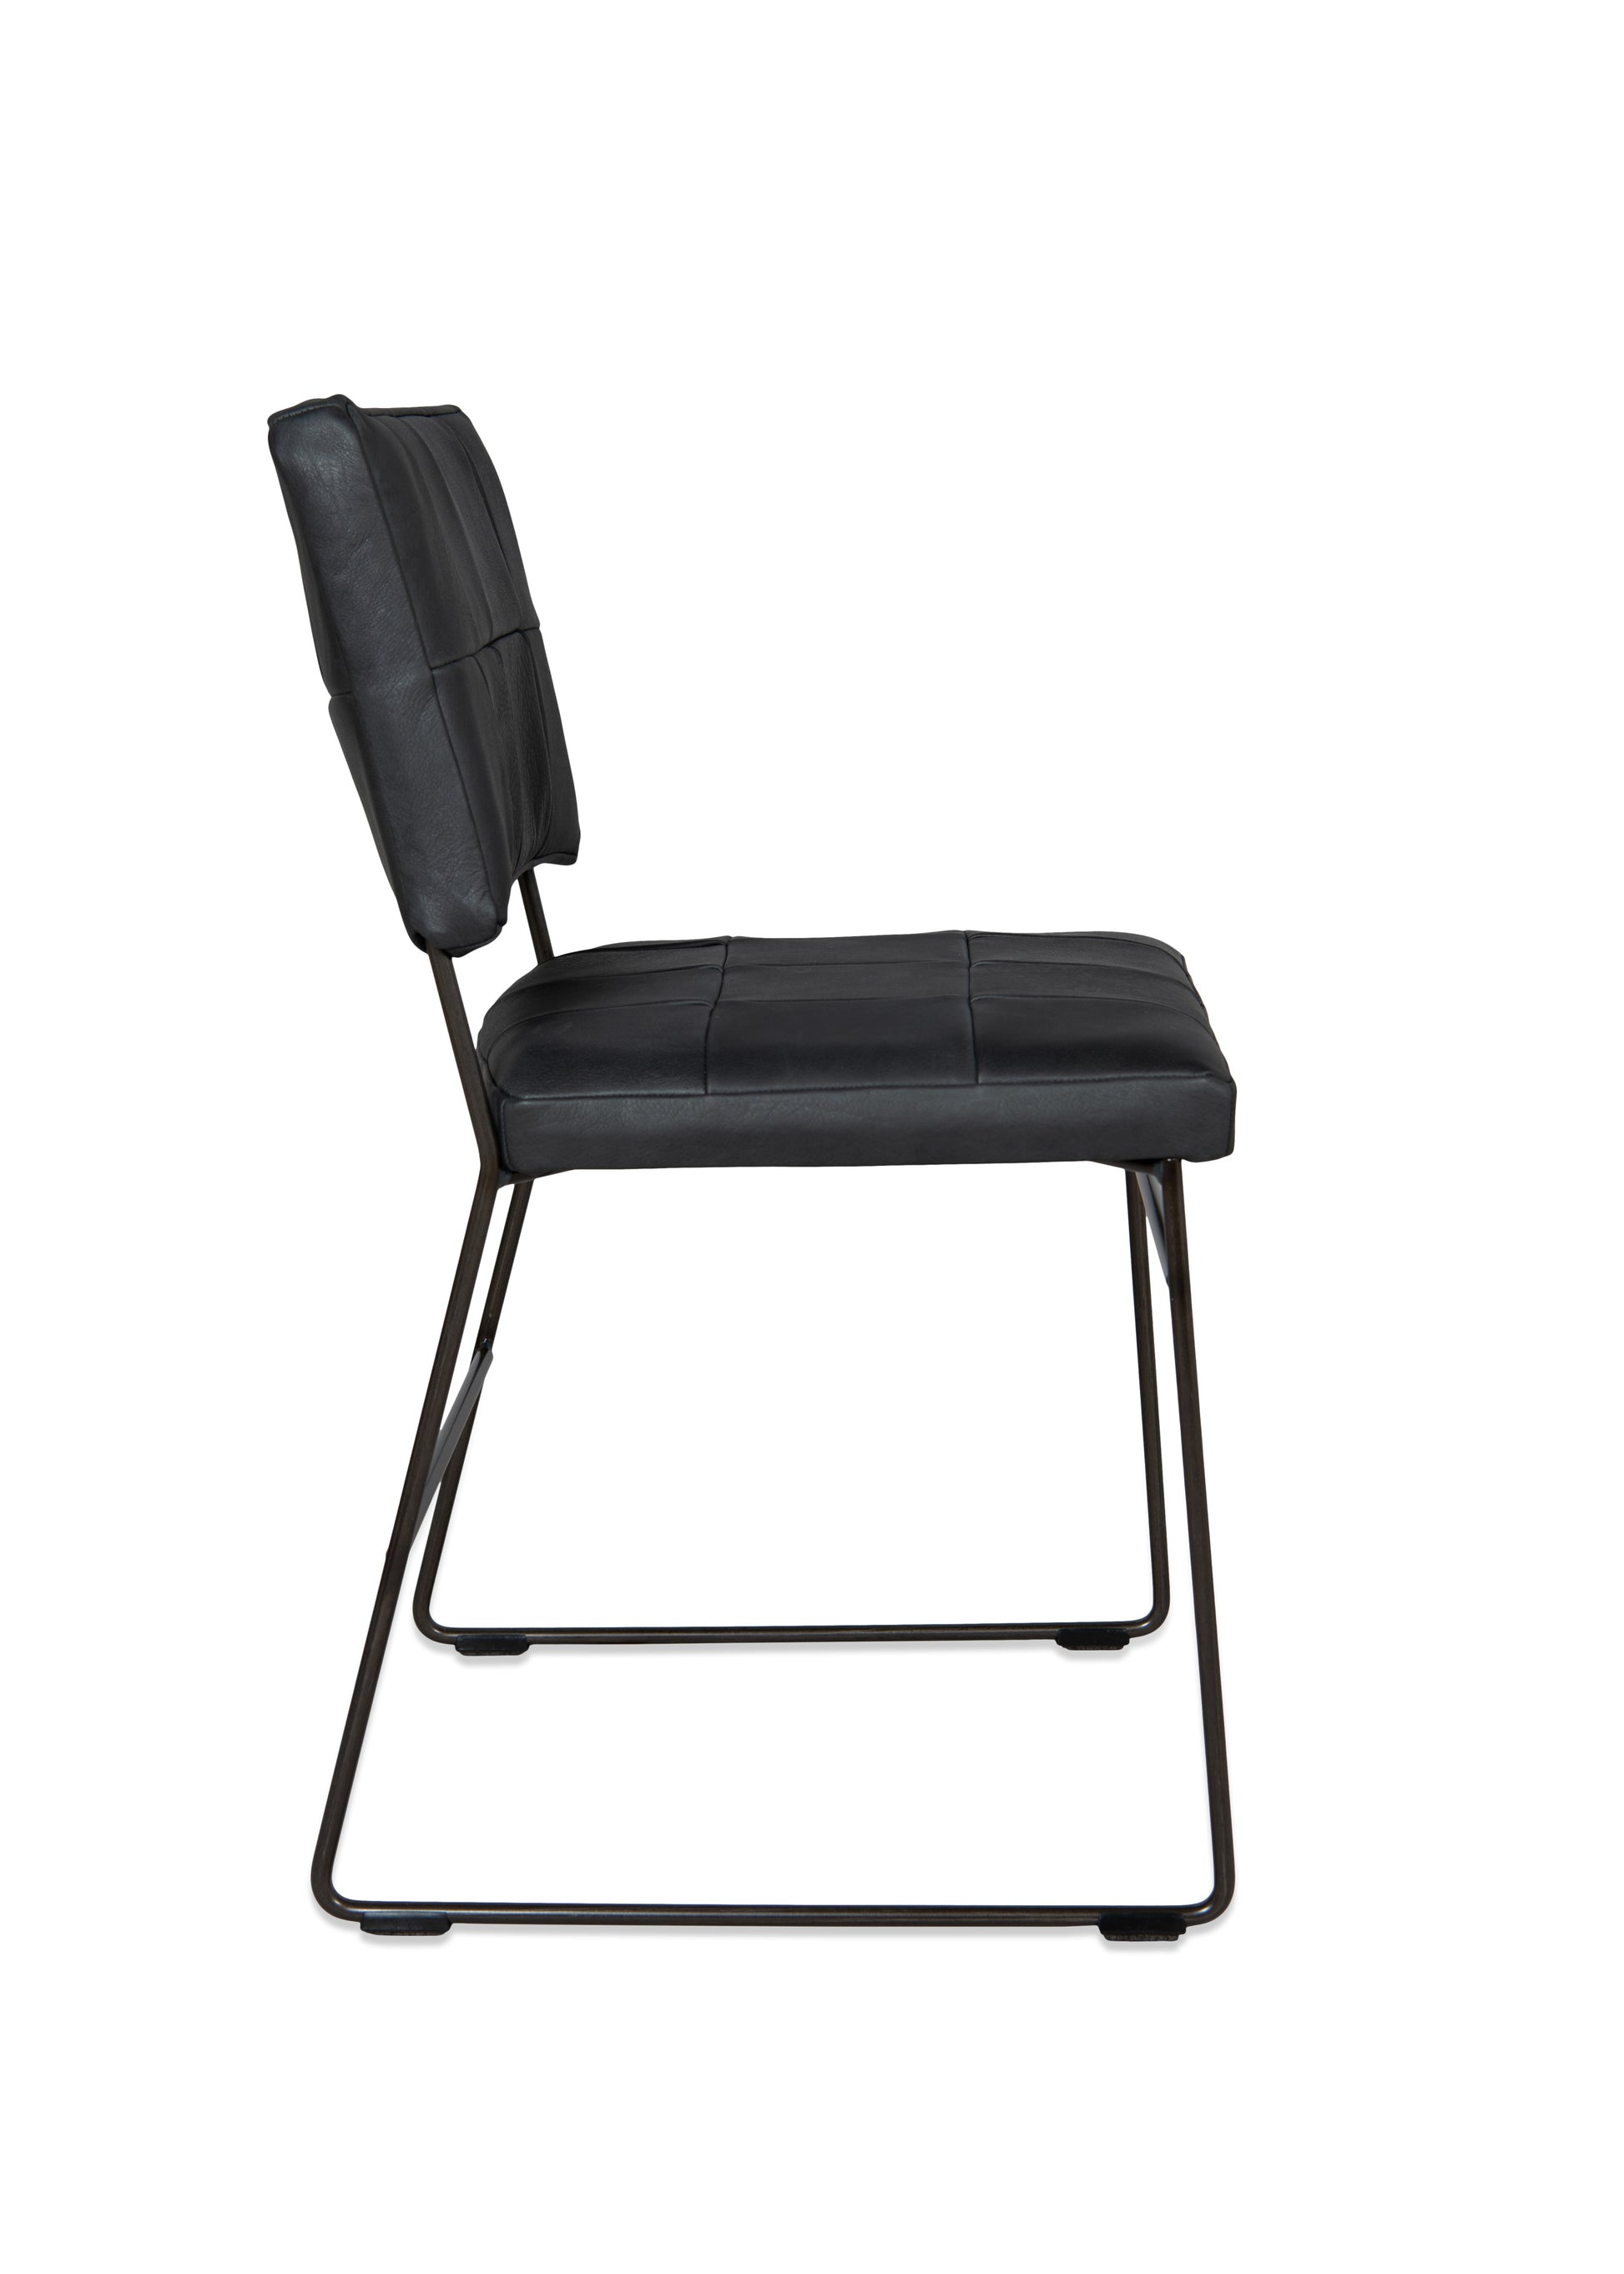 Mila 12mm Old Glory Frame - Chair